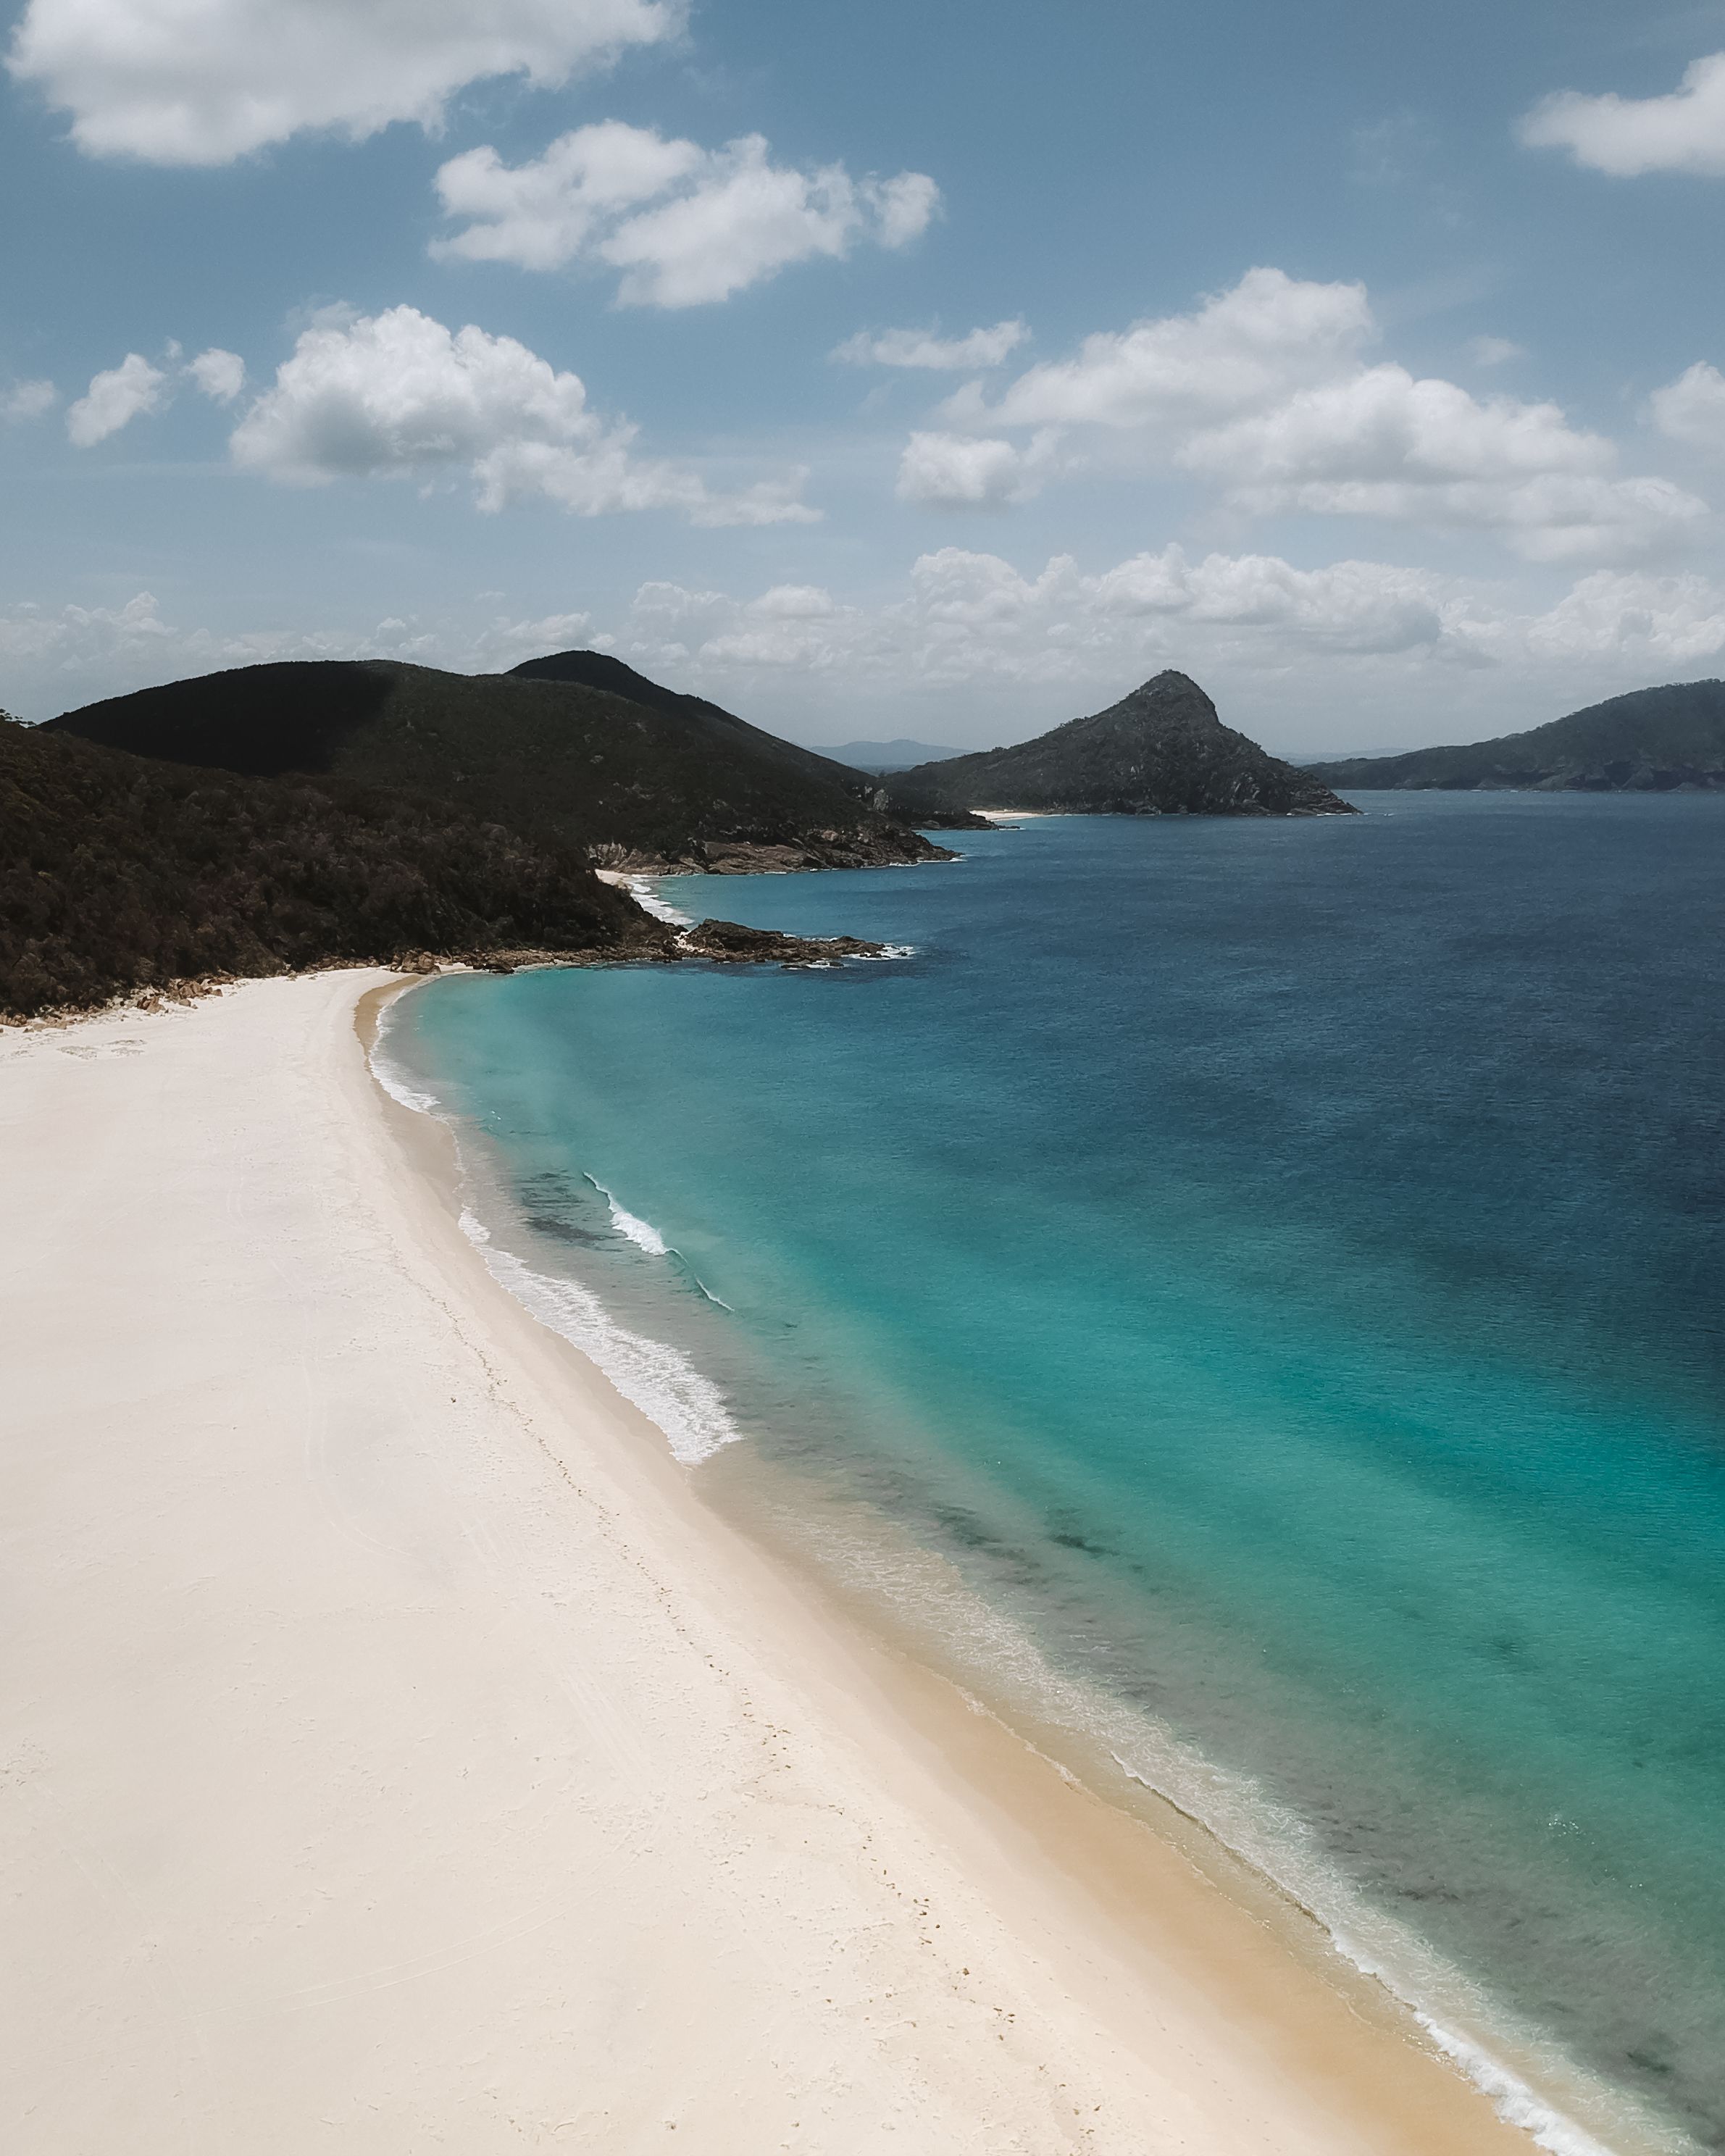 THESE BEACH PICTURES WILL MAKE YOU BOOK YOUR TICKET TO AUSTRALIA!